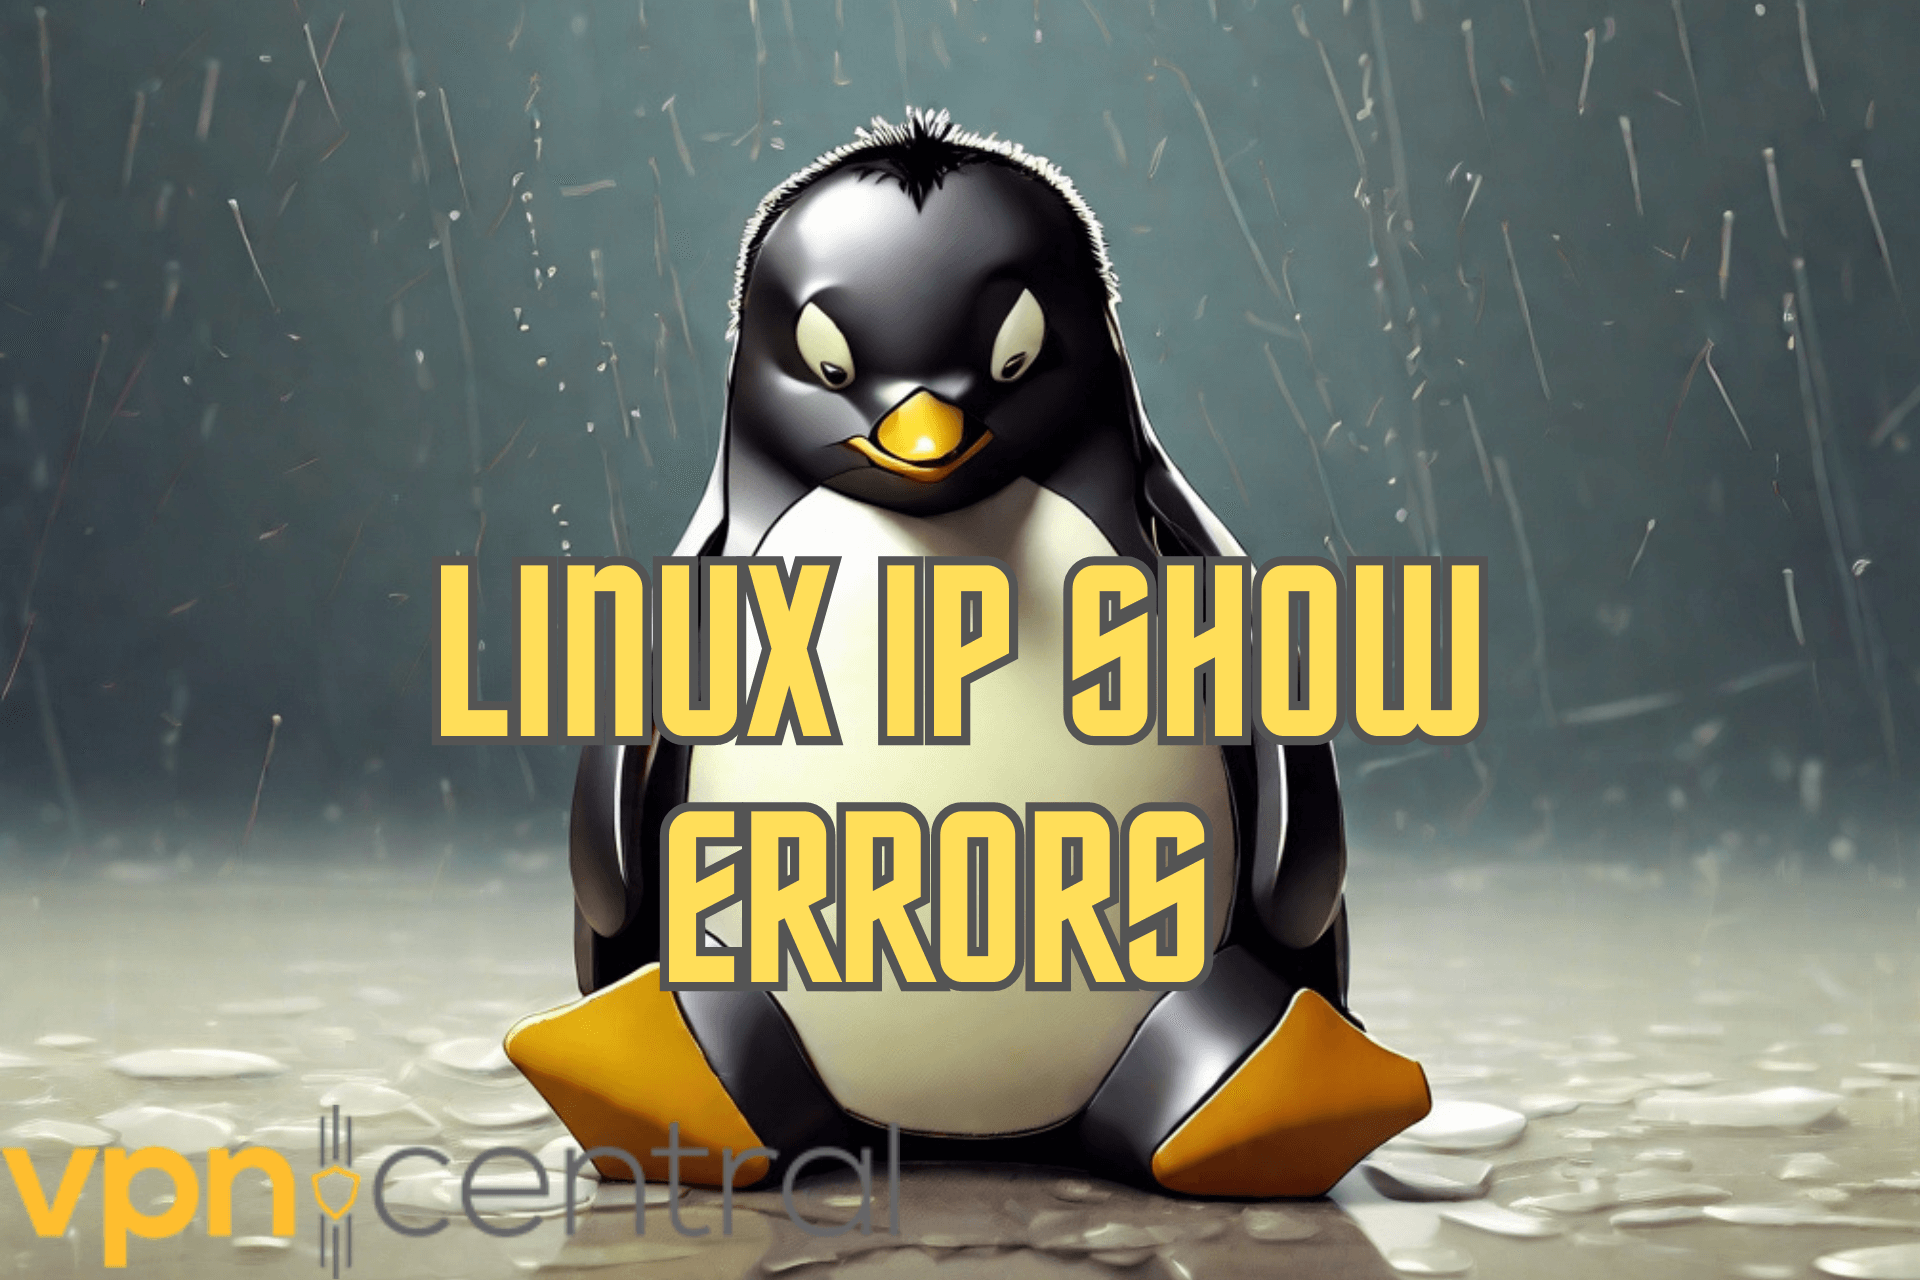 Linux IP Show Errors [SOLVED]